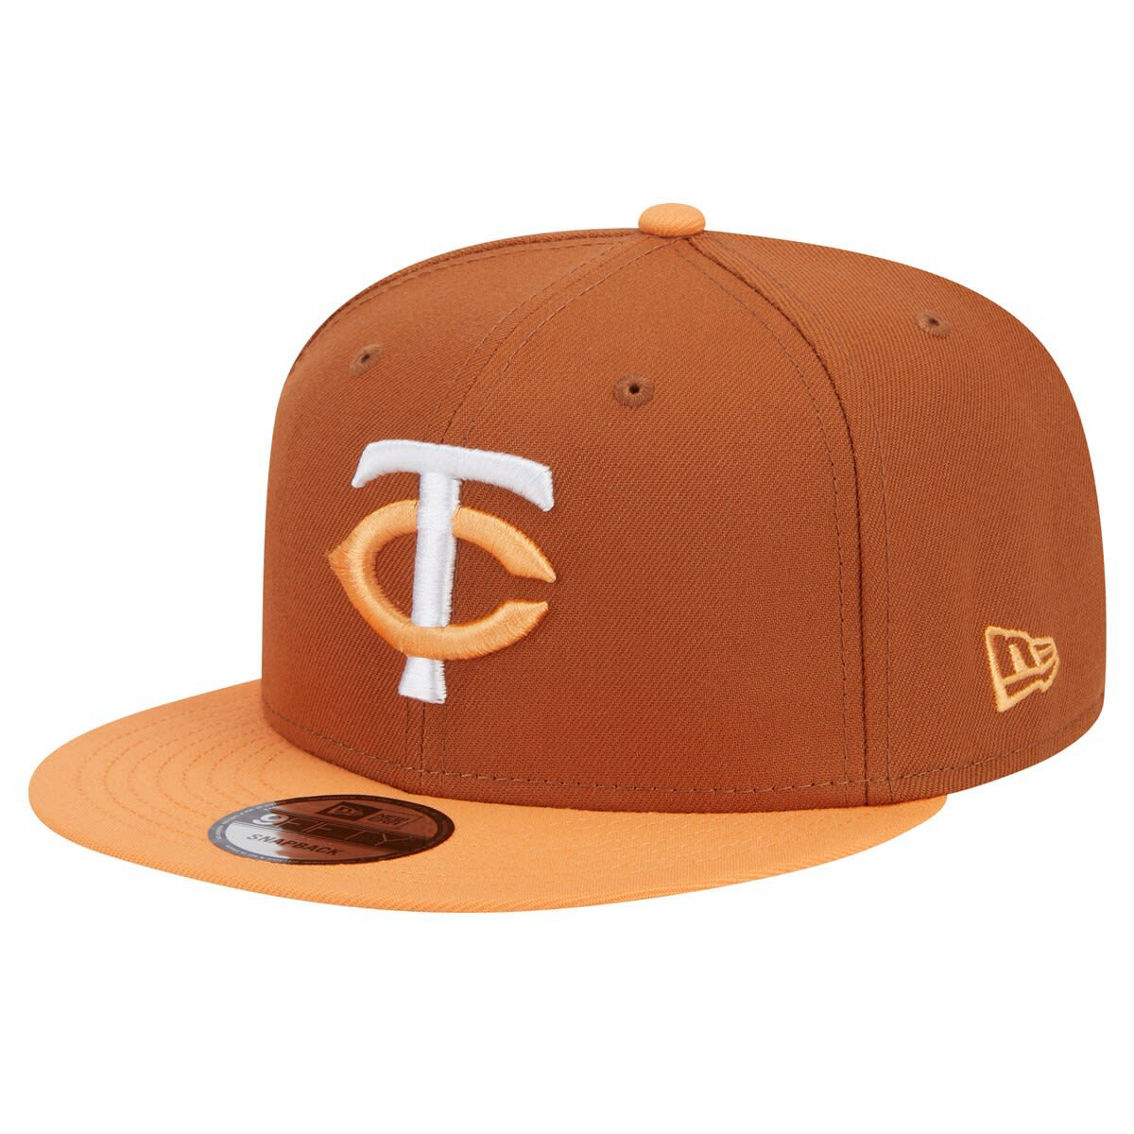 New Era Men's Brown Minnesota Twins Spring Color Two-Tone 9FIFTY Snapback Hat - Image 2 of 4